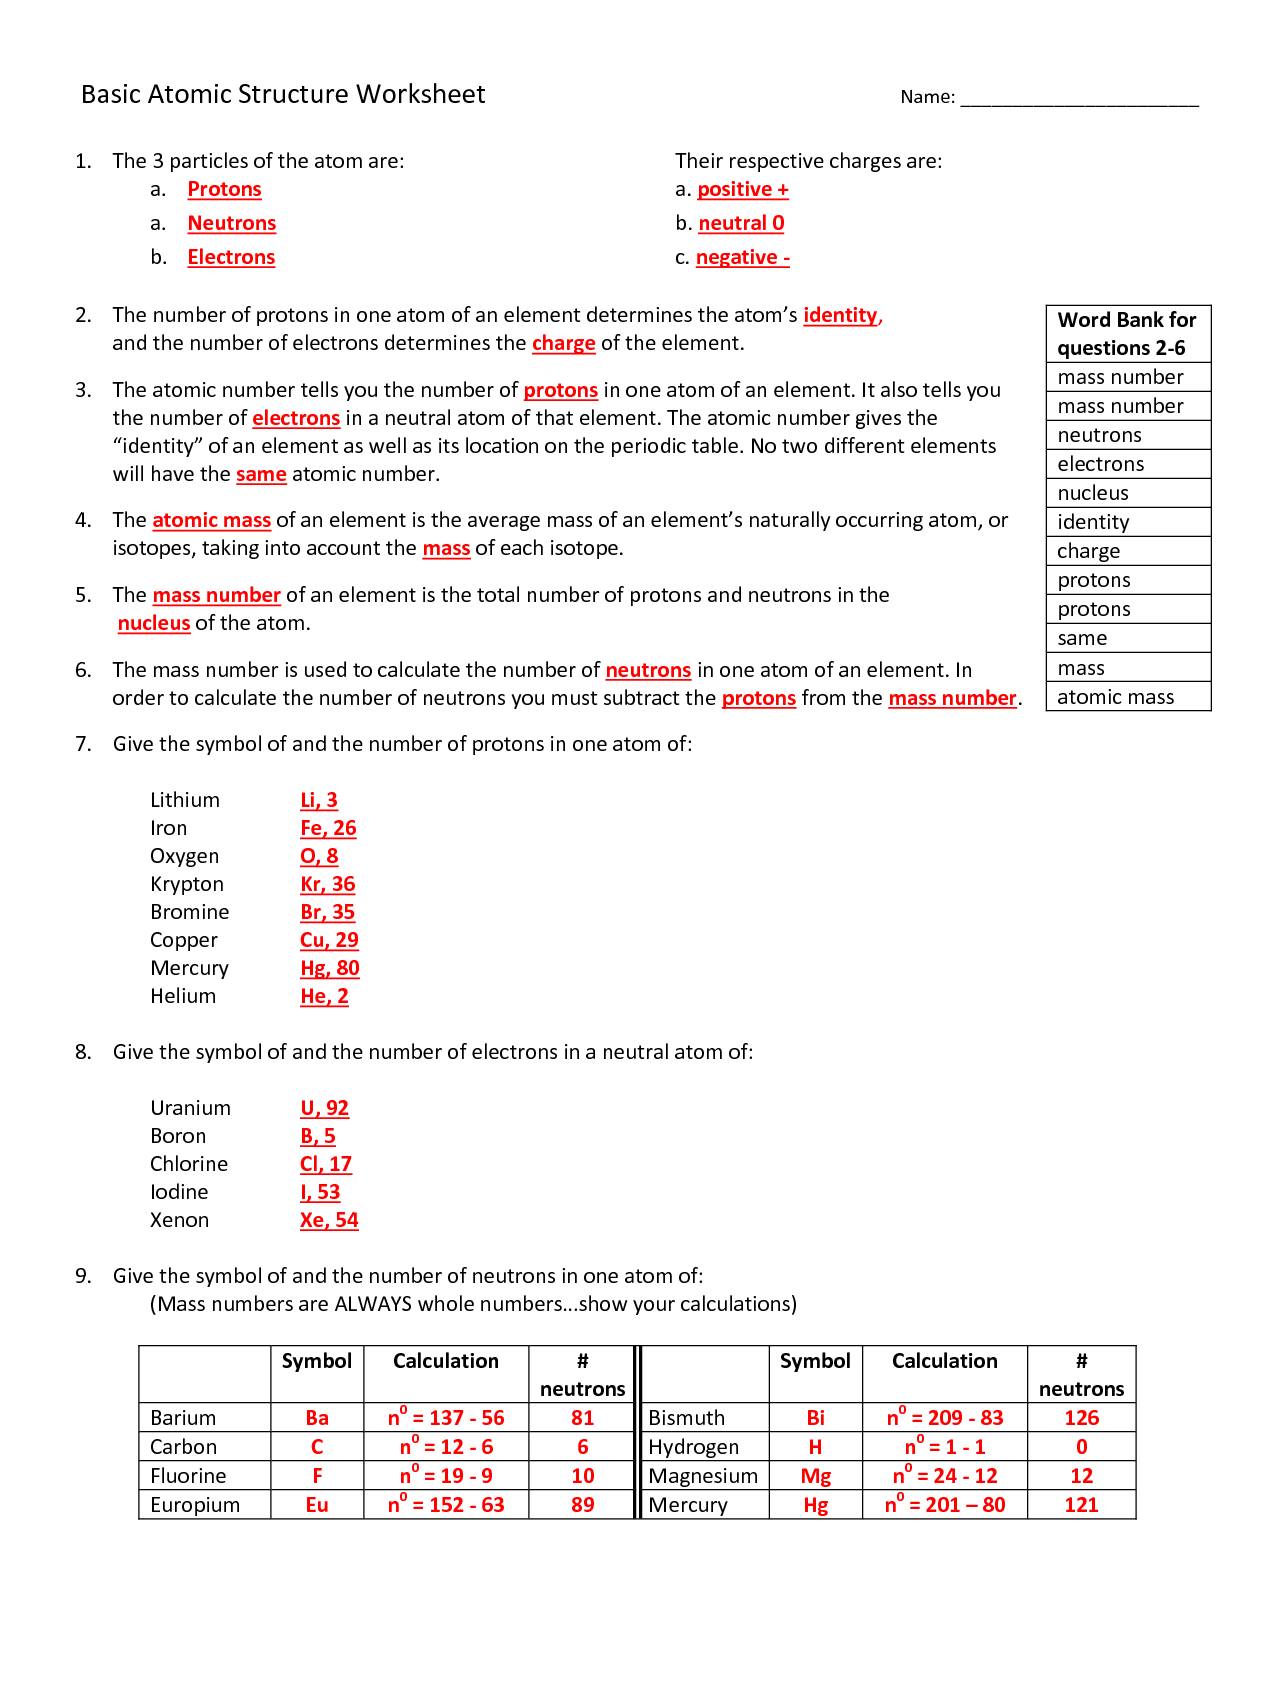 12 Best Images of Atomic Structure Diagram Worksheet  Atomic Structure Worksheet Answers 